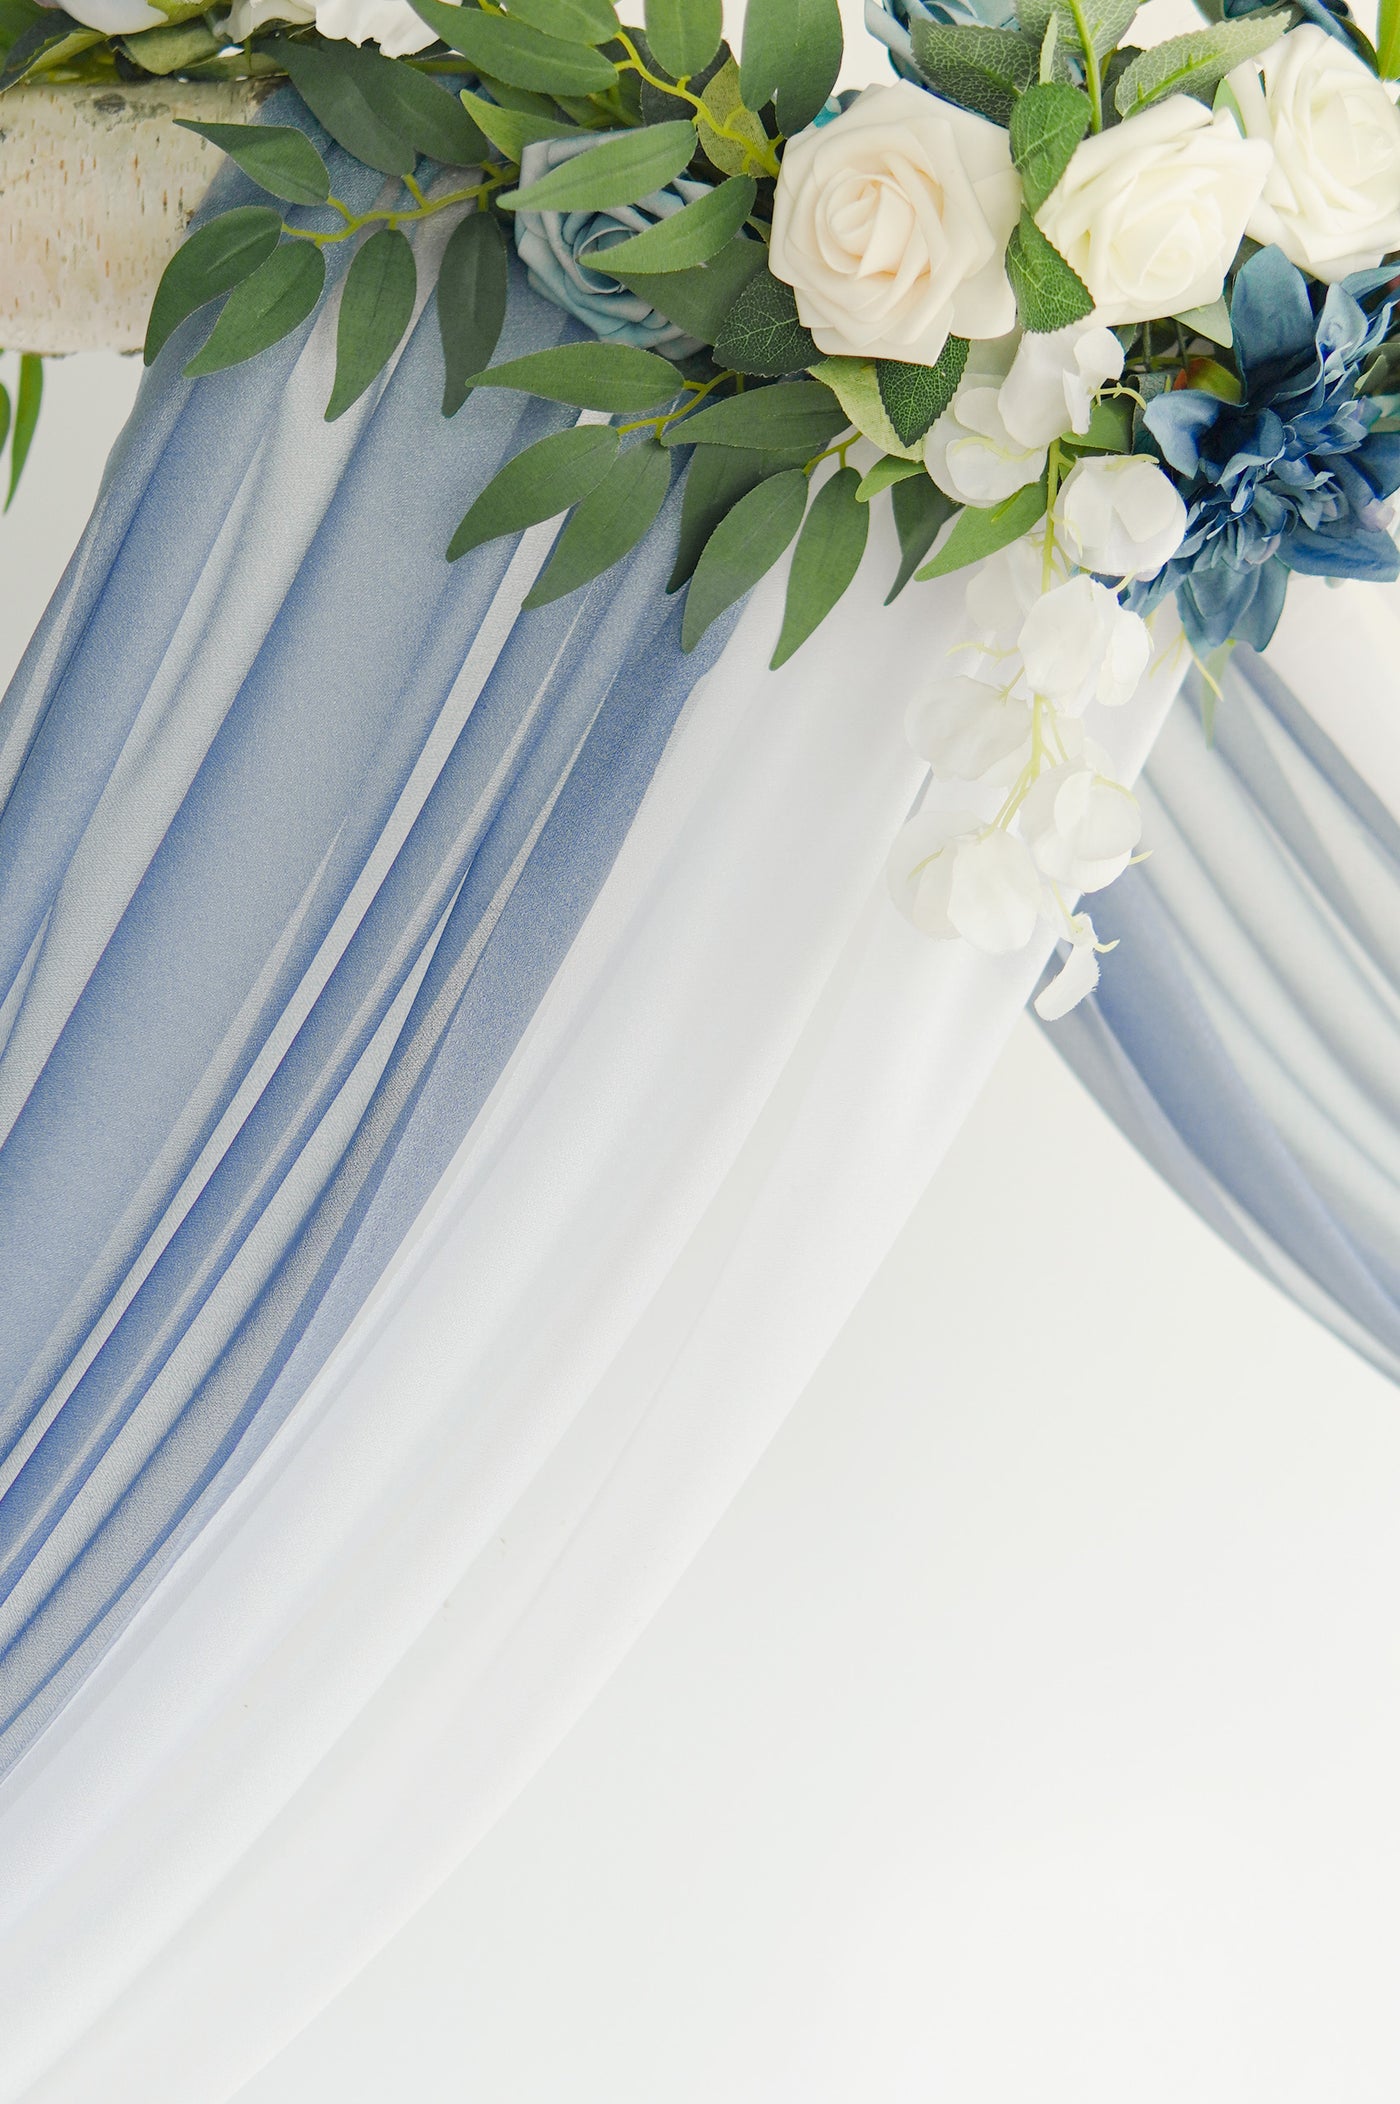 2 Pcs Rustic Wedding Arch Draping 29"w x 19.7ft - Dusty Blue & White